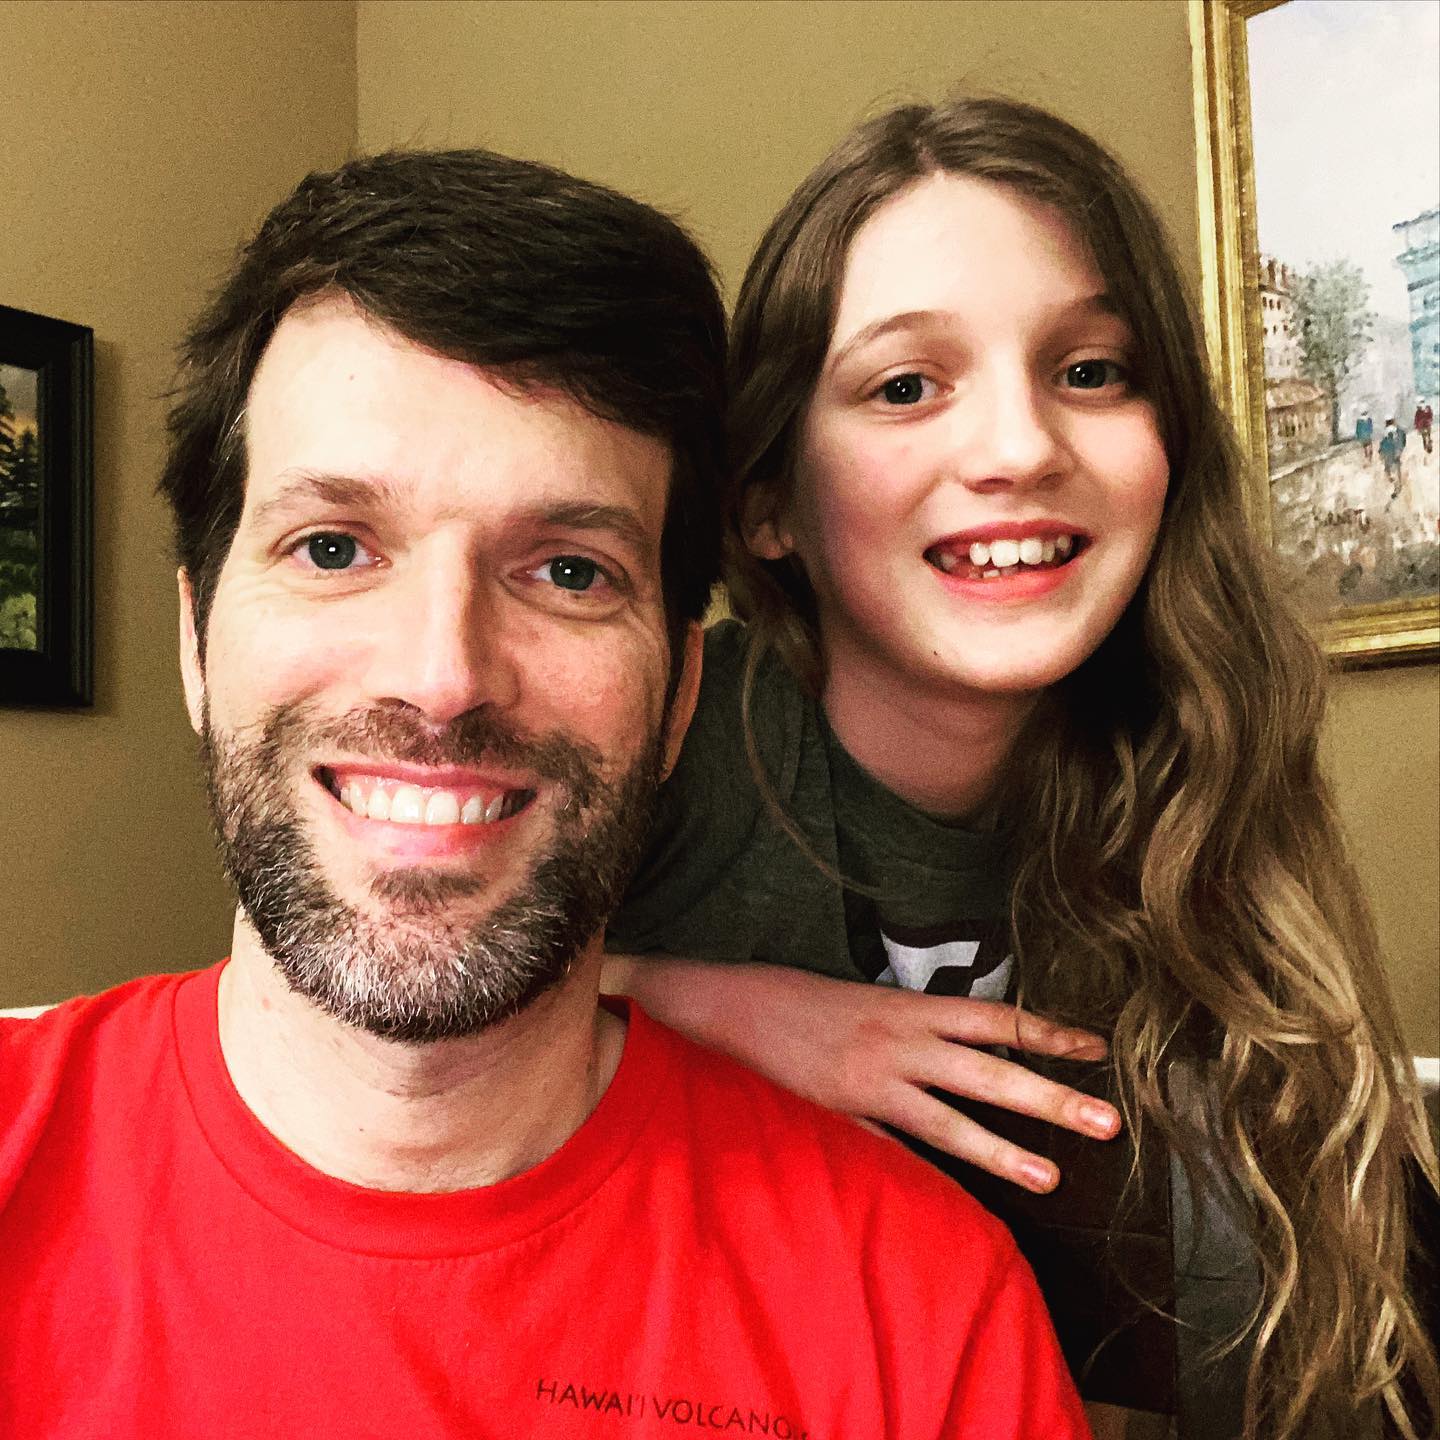 Self-quarantine beard update: Day 17. Sara continues to beg me not to shave and for some reason I’m being compliant. #beard #family #covid_19 #coronavirus